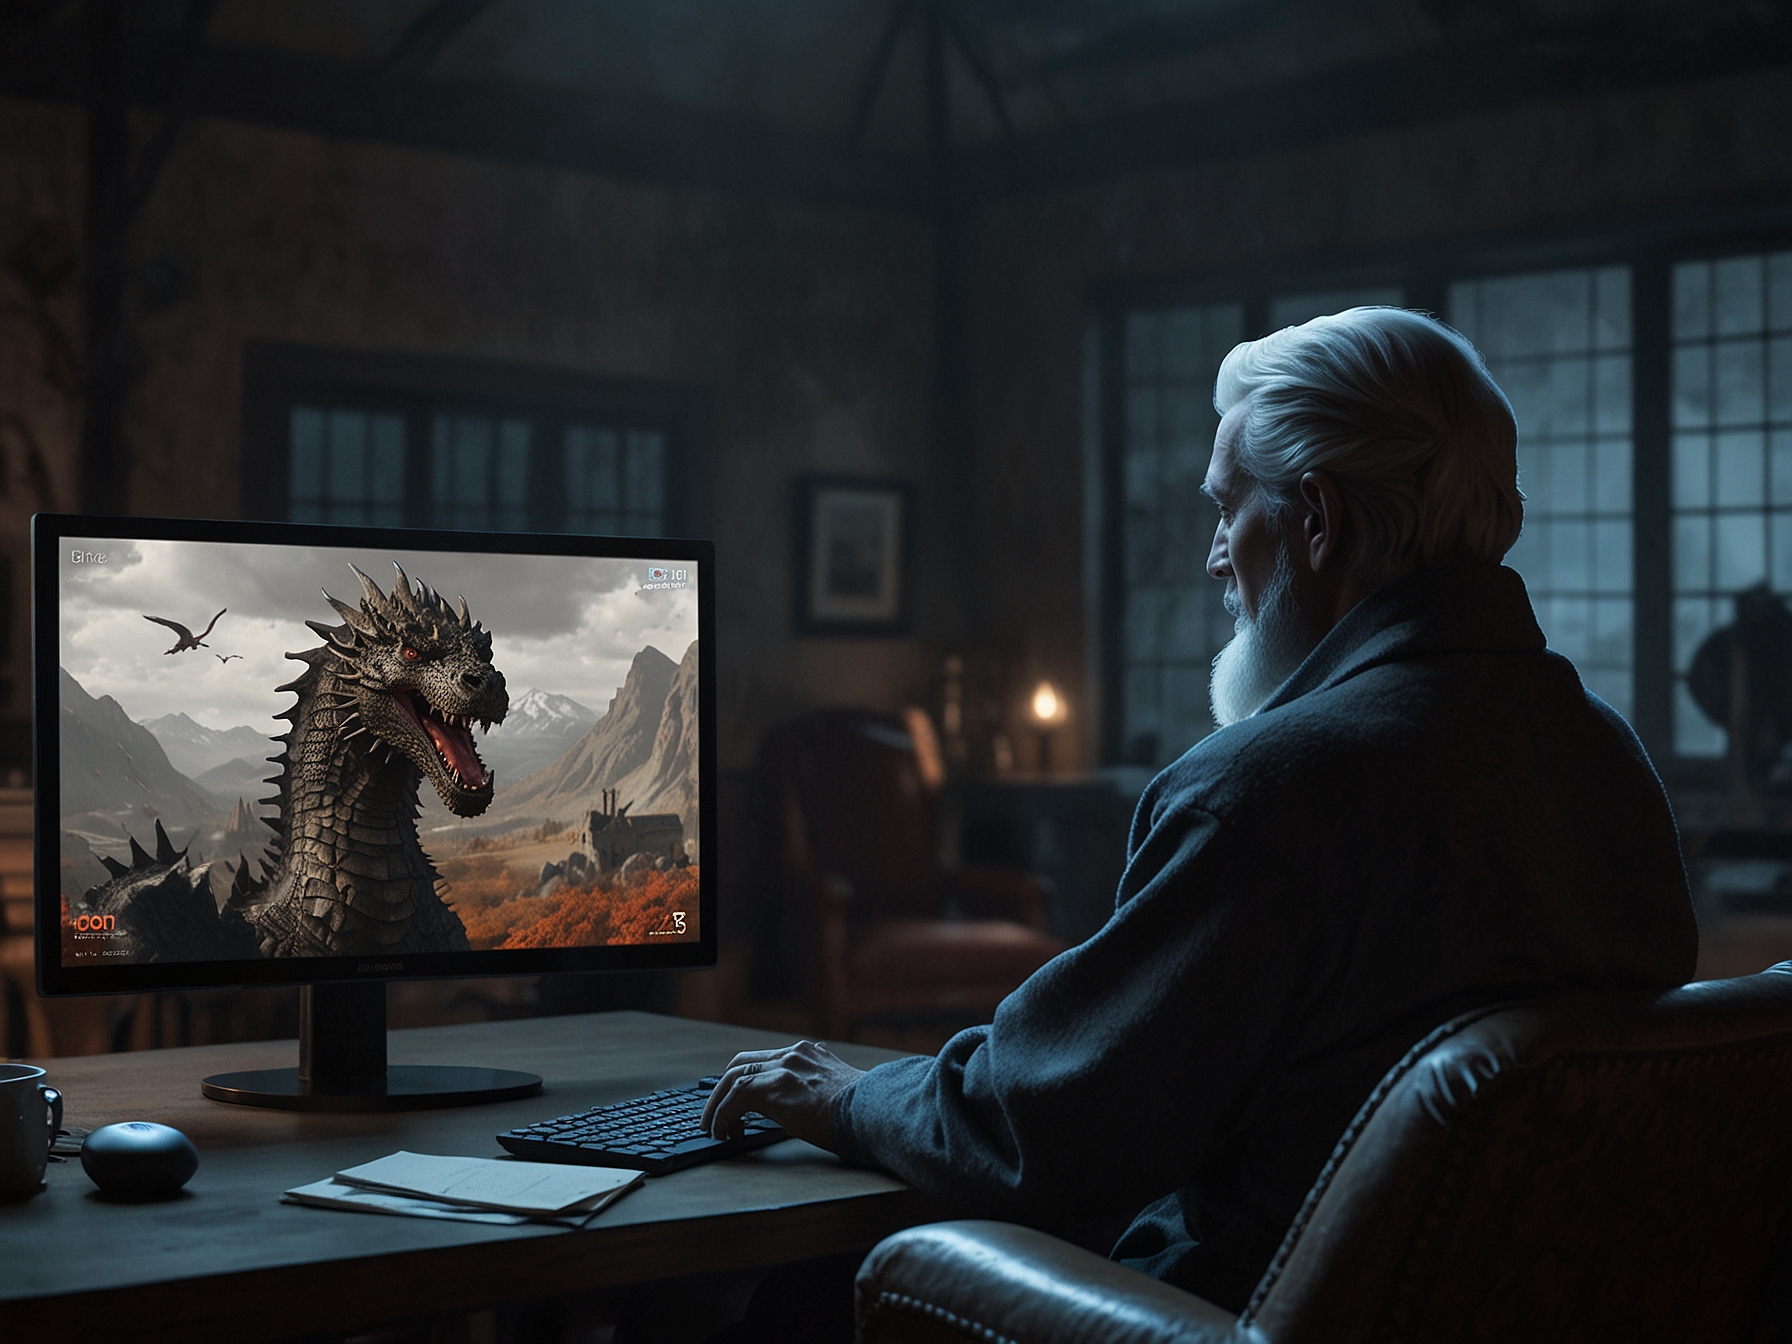 A fan viewing 'House of the Dragon' on a streaming platform, utilizing a VPN for seamless access from outside the U.S., showcasing the global interest in the series.